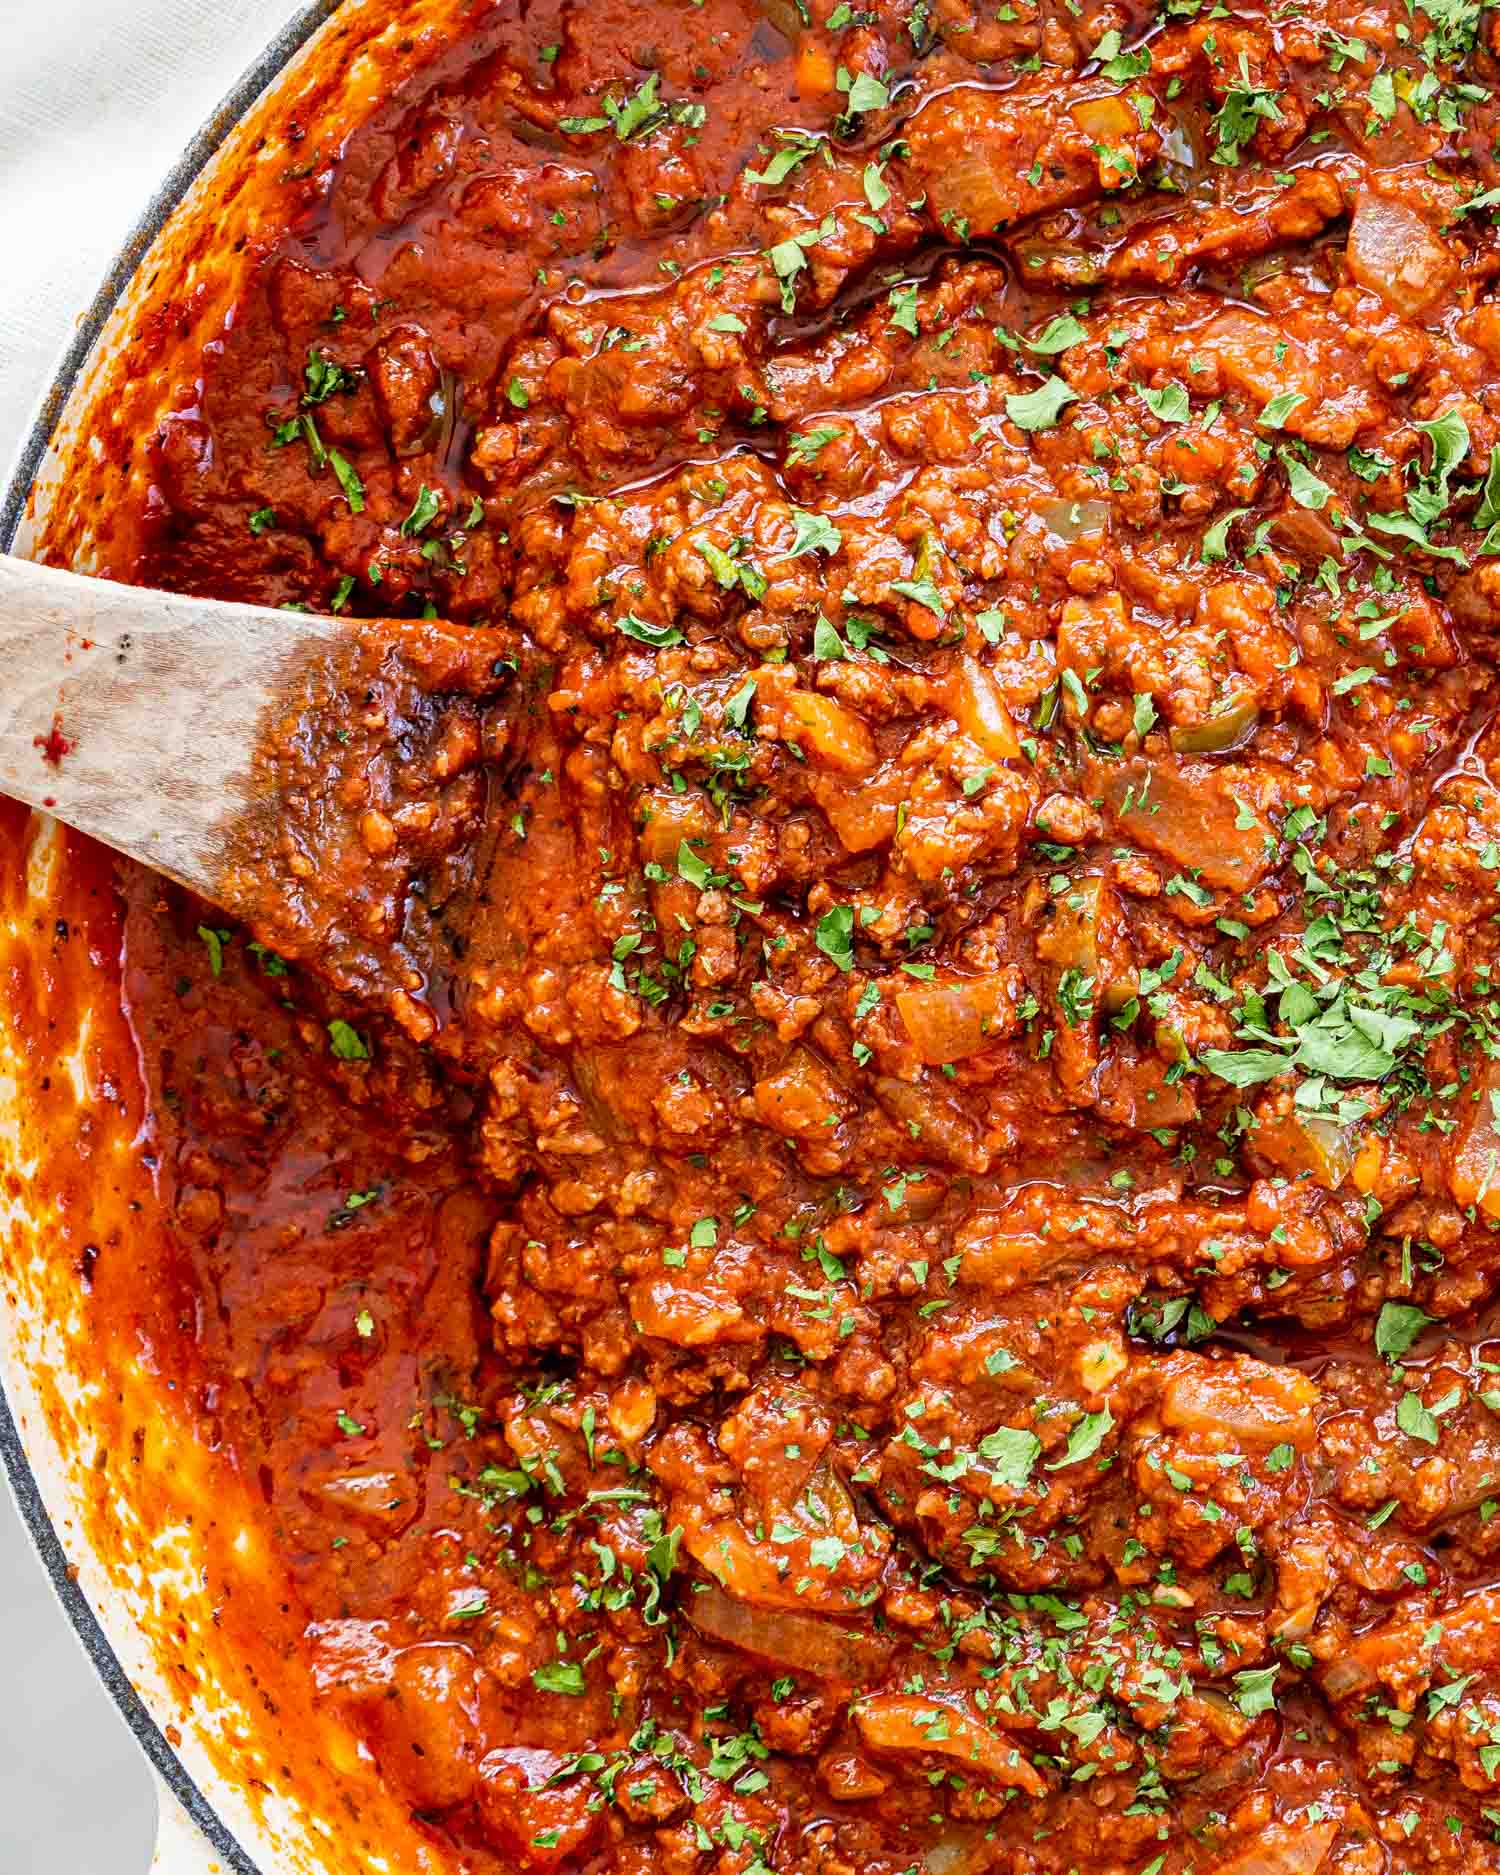 17 Seasoning Tips To Add Flavor To Your Meat, Pasta, & More